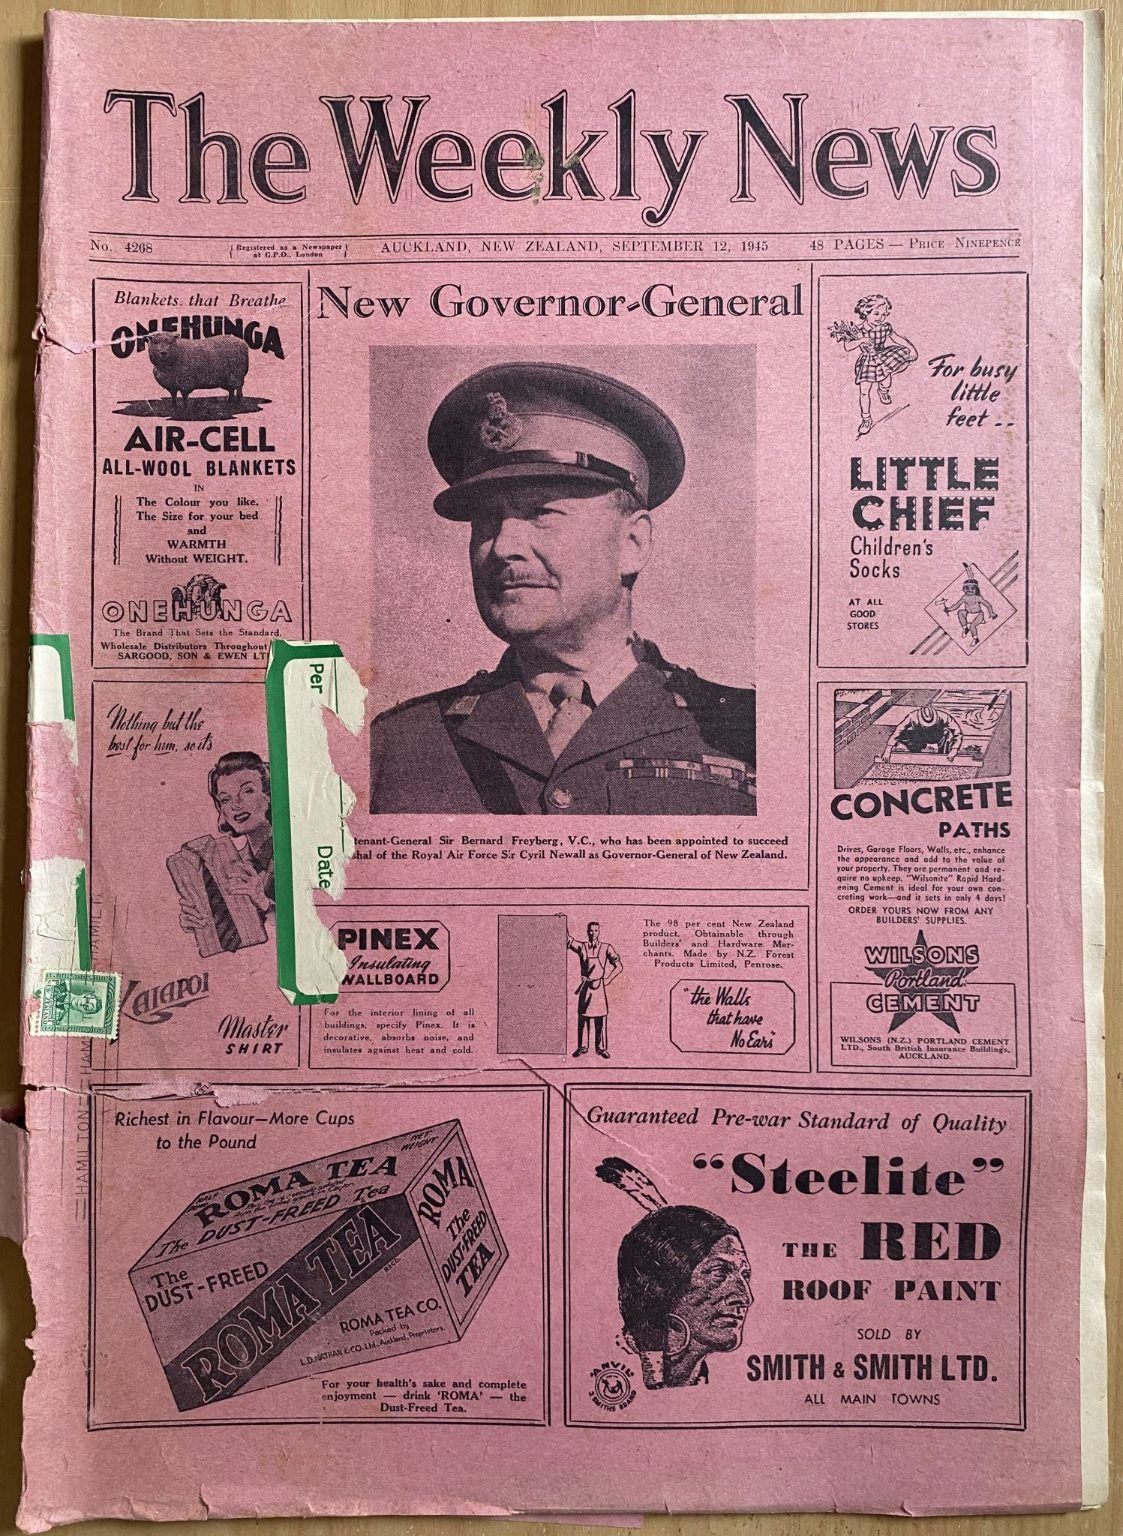 OLD NEWSPAPER: The Weekly News - No. 4268, 12 September 1945